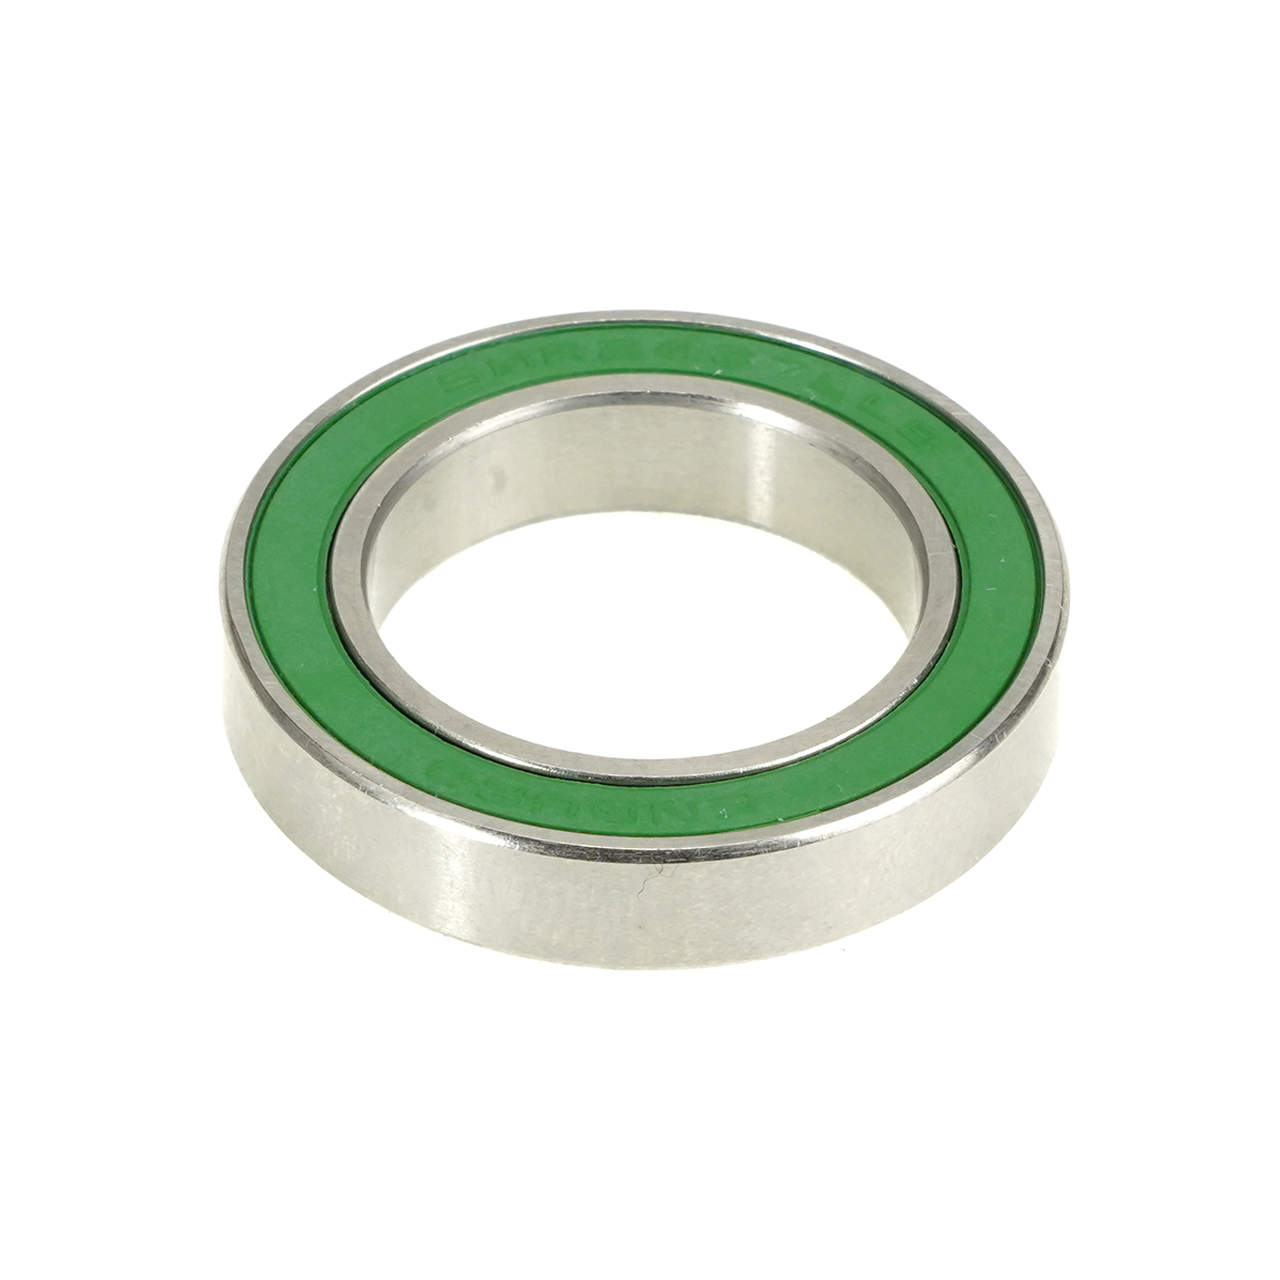 SMRA 2437 LLB Stainless Steel Bearing | 24 x 37 x 7mm